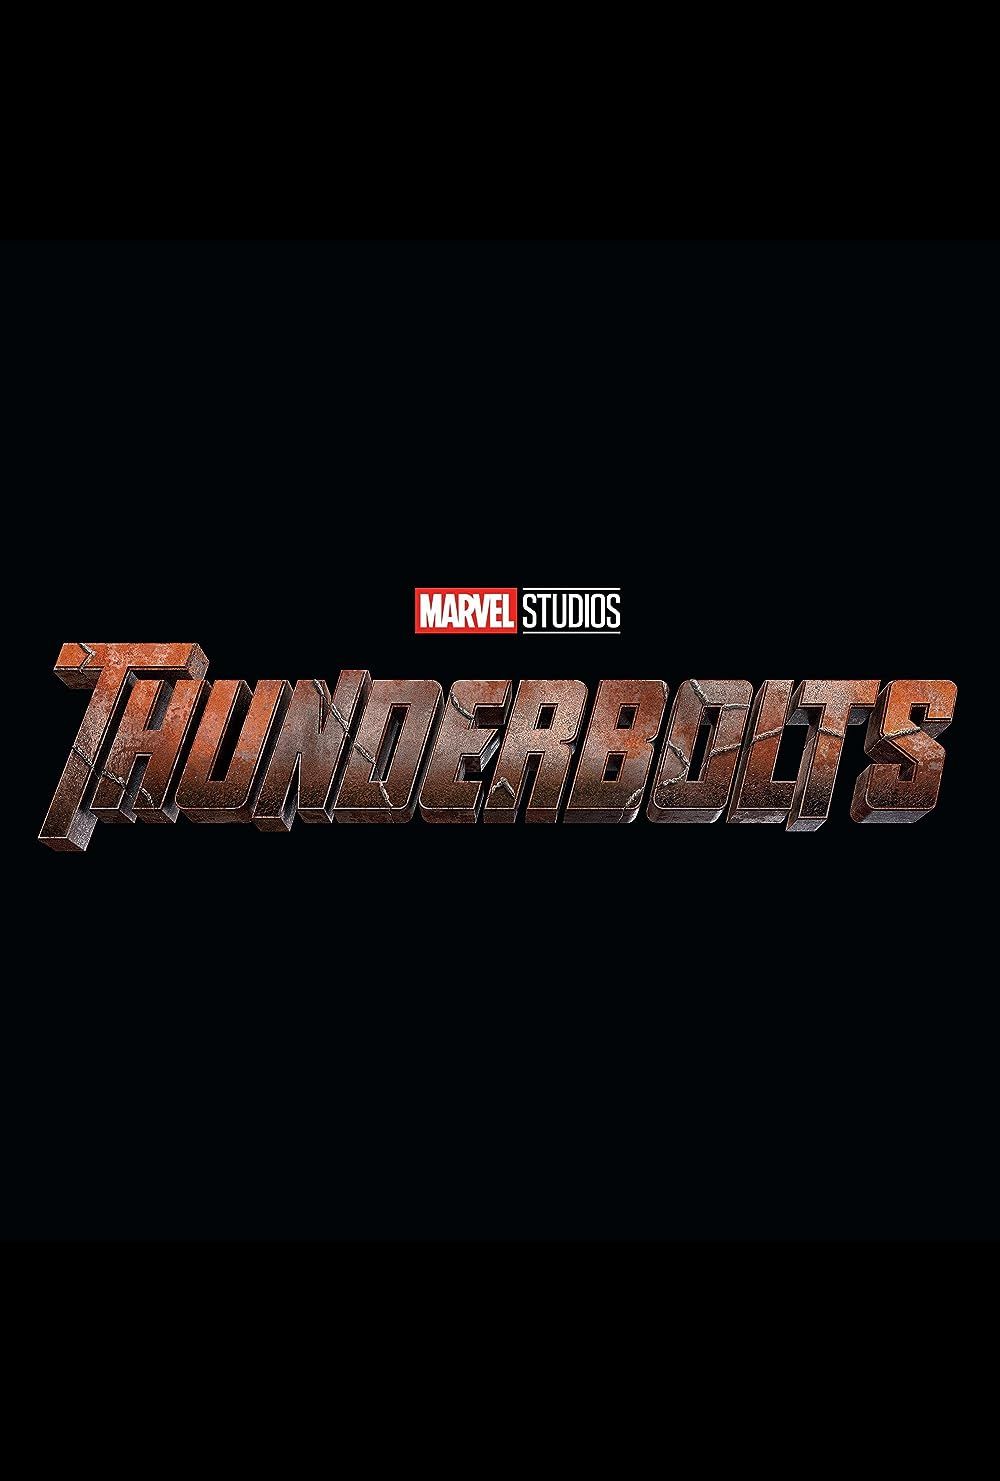 marvel studios unveils updated thunderbolts logo & title at cinemacon